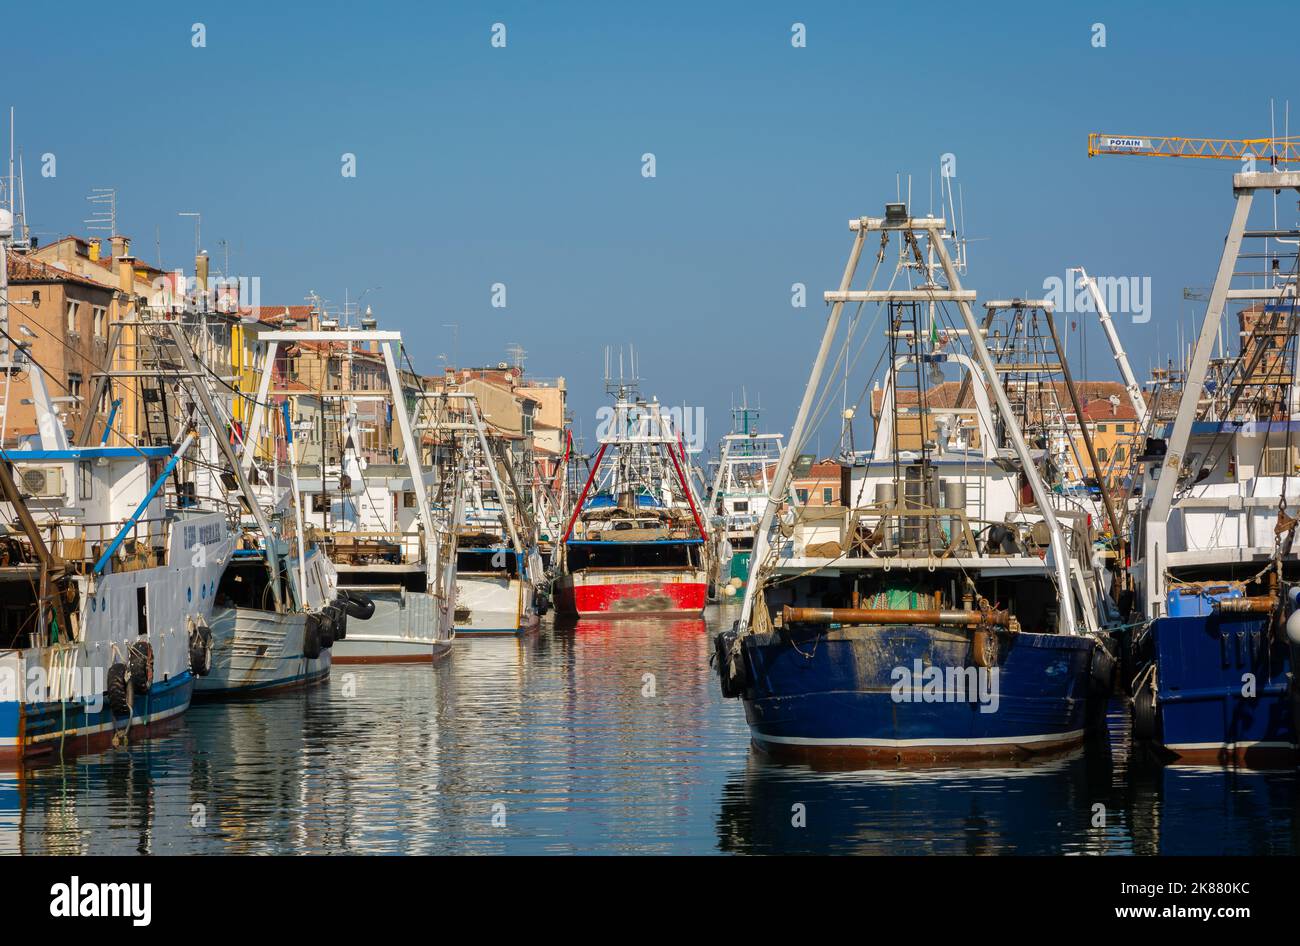 Big fishing boats moored in the port on the Adriatic sea at Chioggia city, Venetian lagoon, Venice province, northern Italy Stock Photo